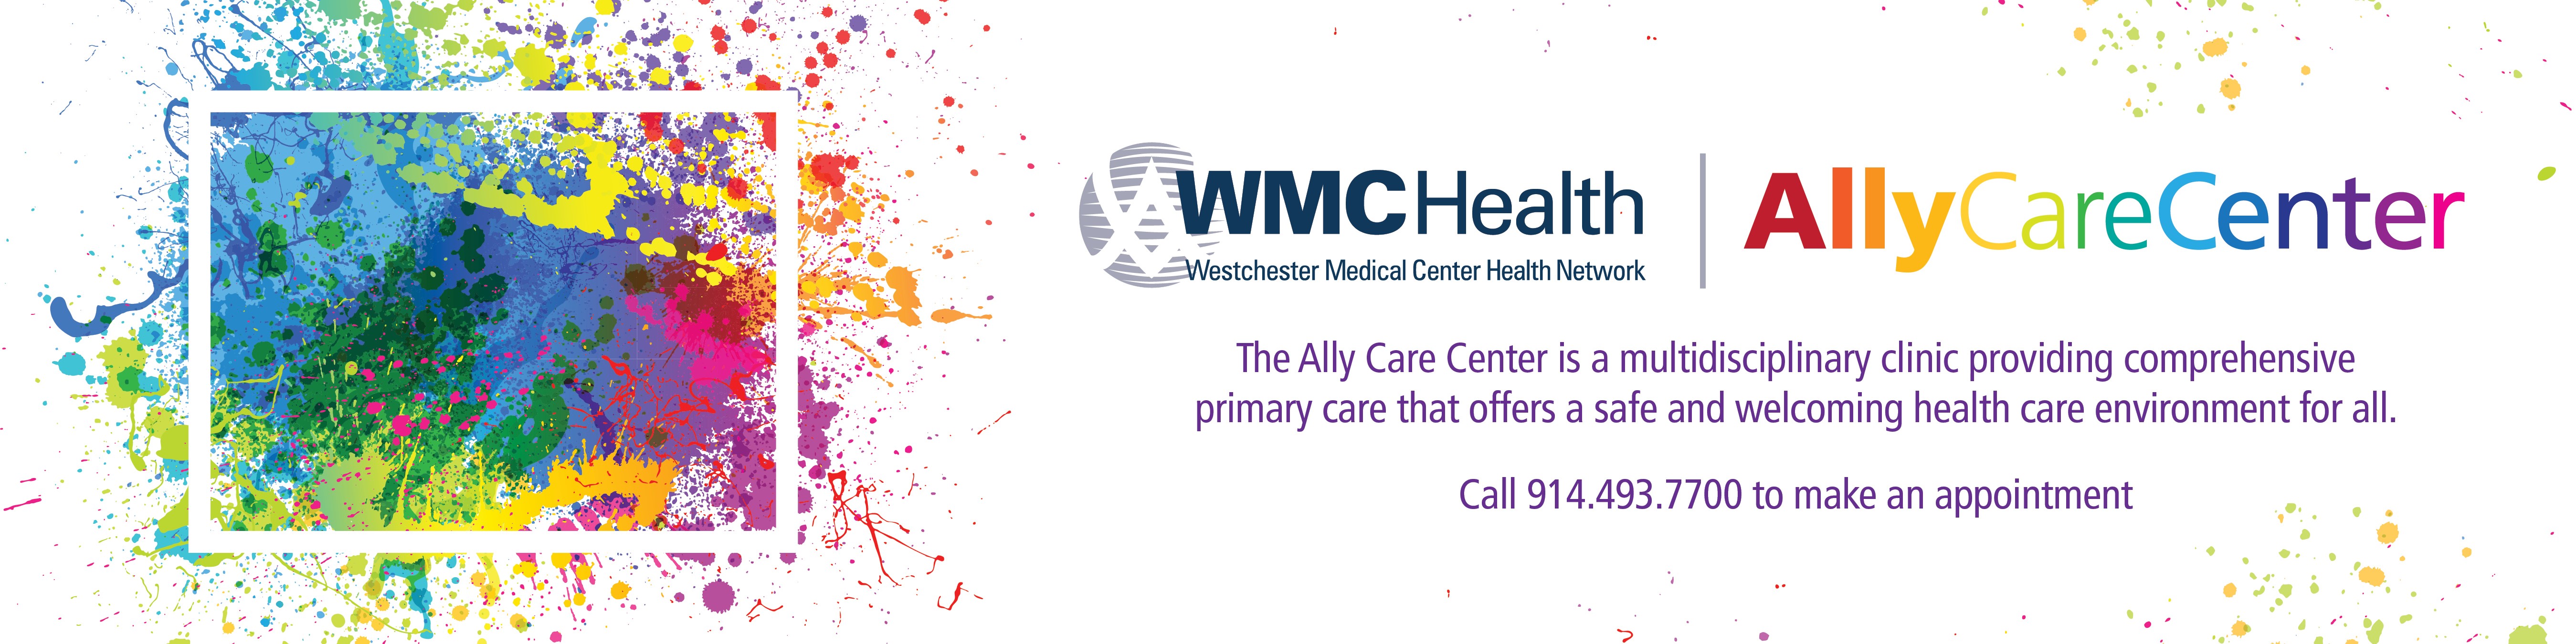 Ally Care Center: Call 914.493.7700 to make an appointment